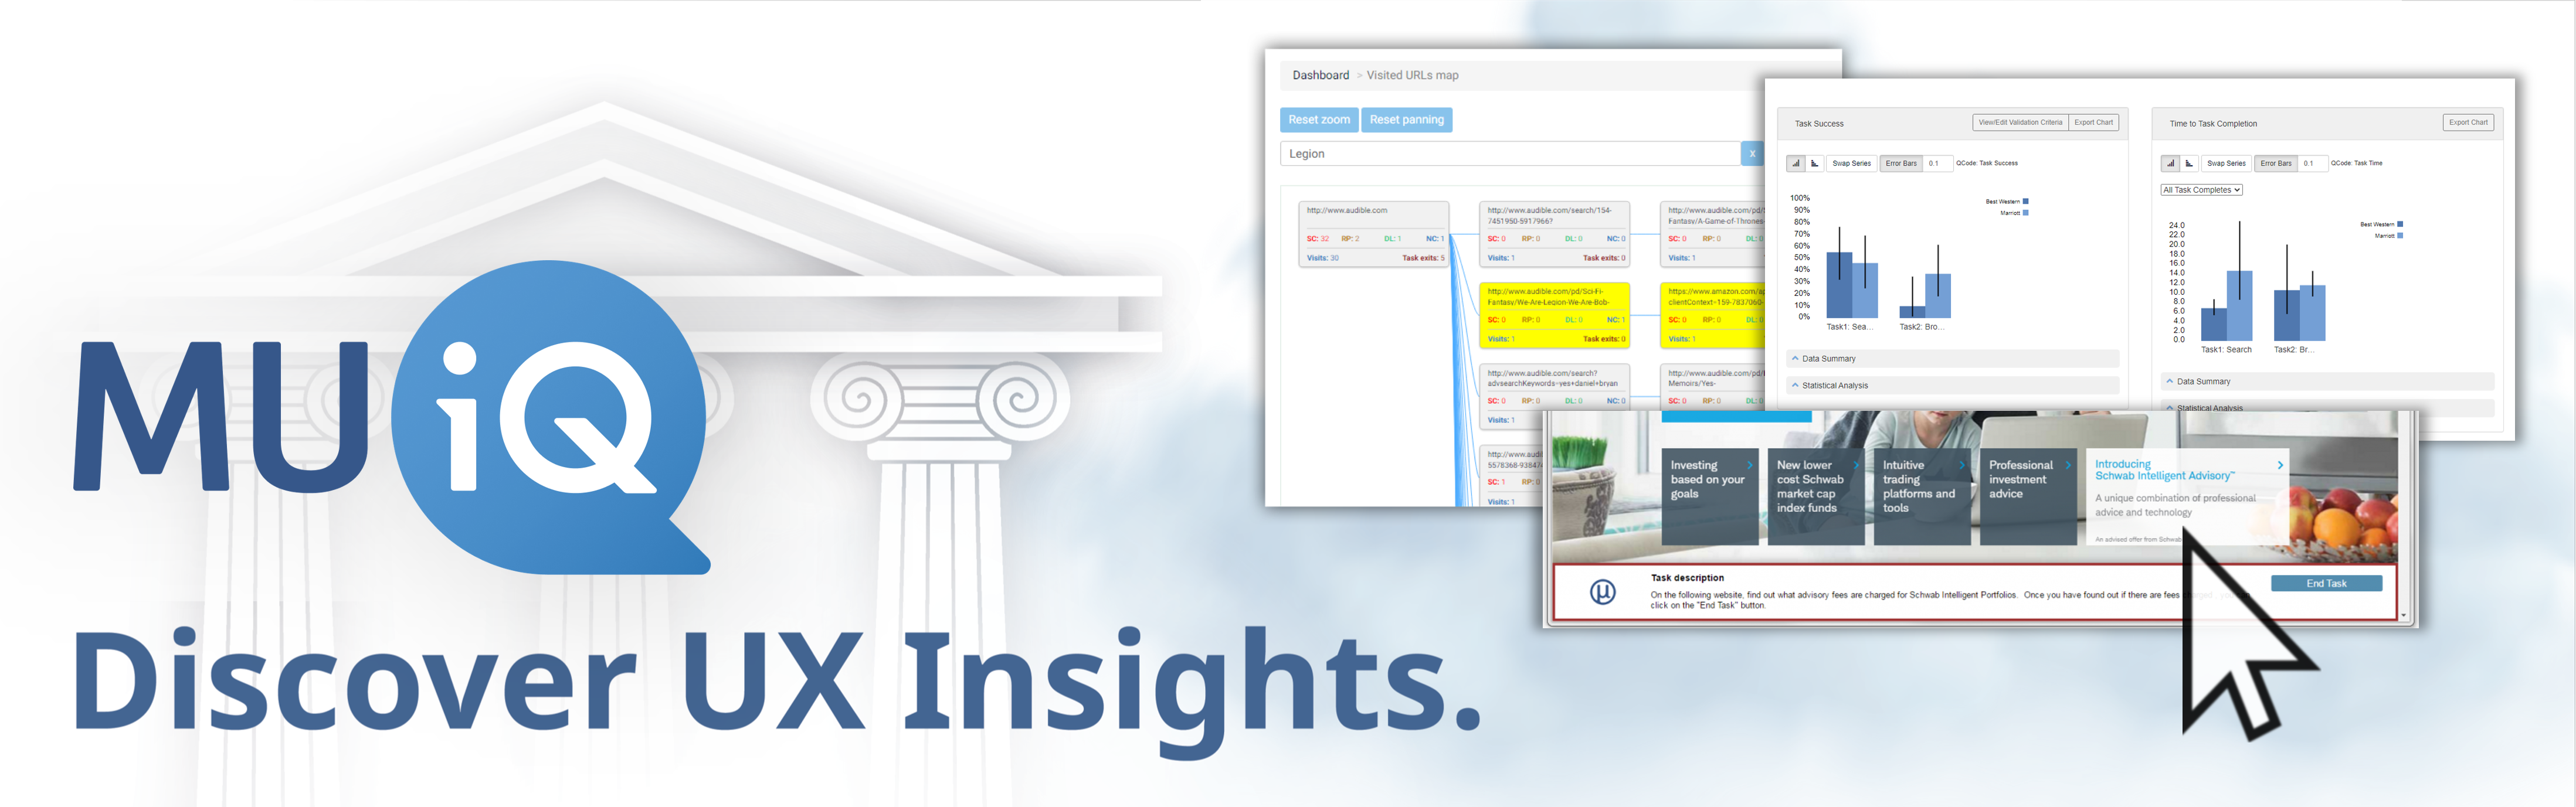 MU-iQ banner with screenshots of platform and greek temple illustrations and tagline to discover UX insights